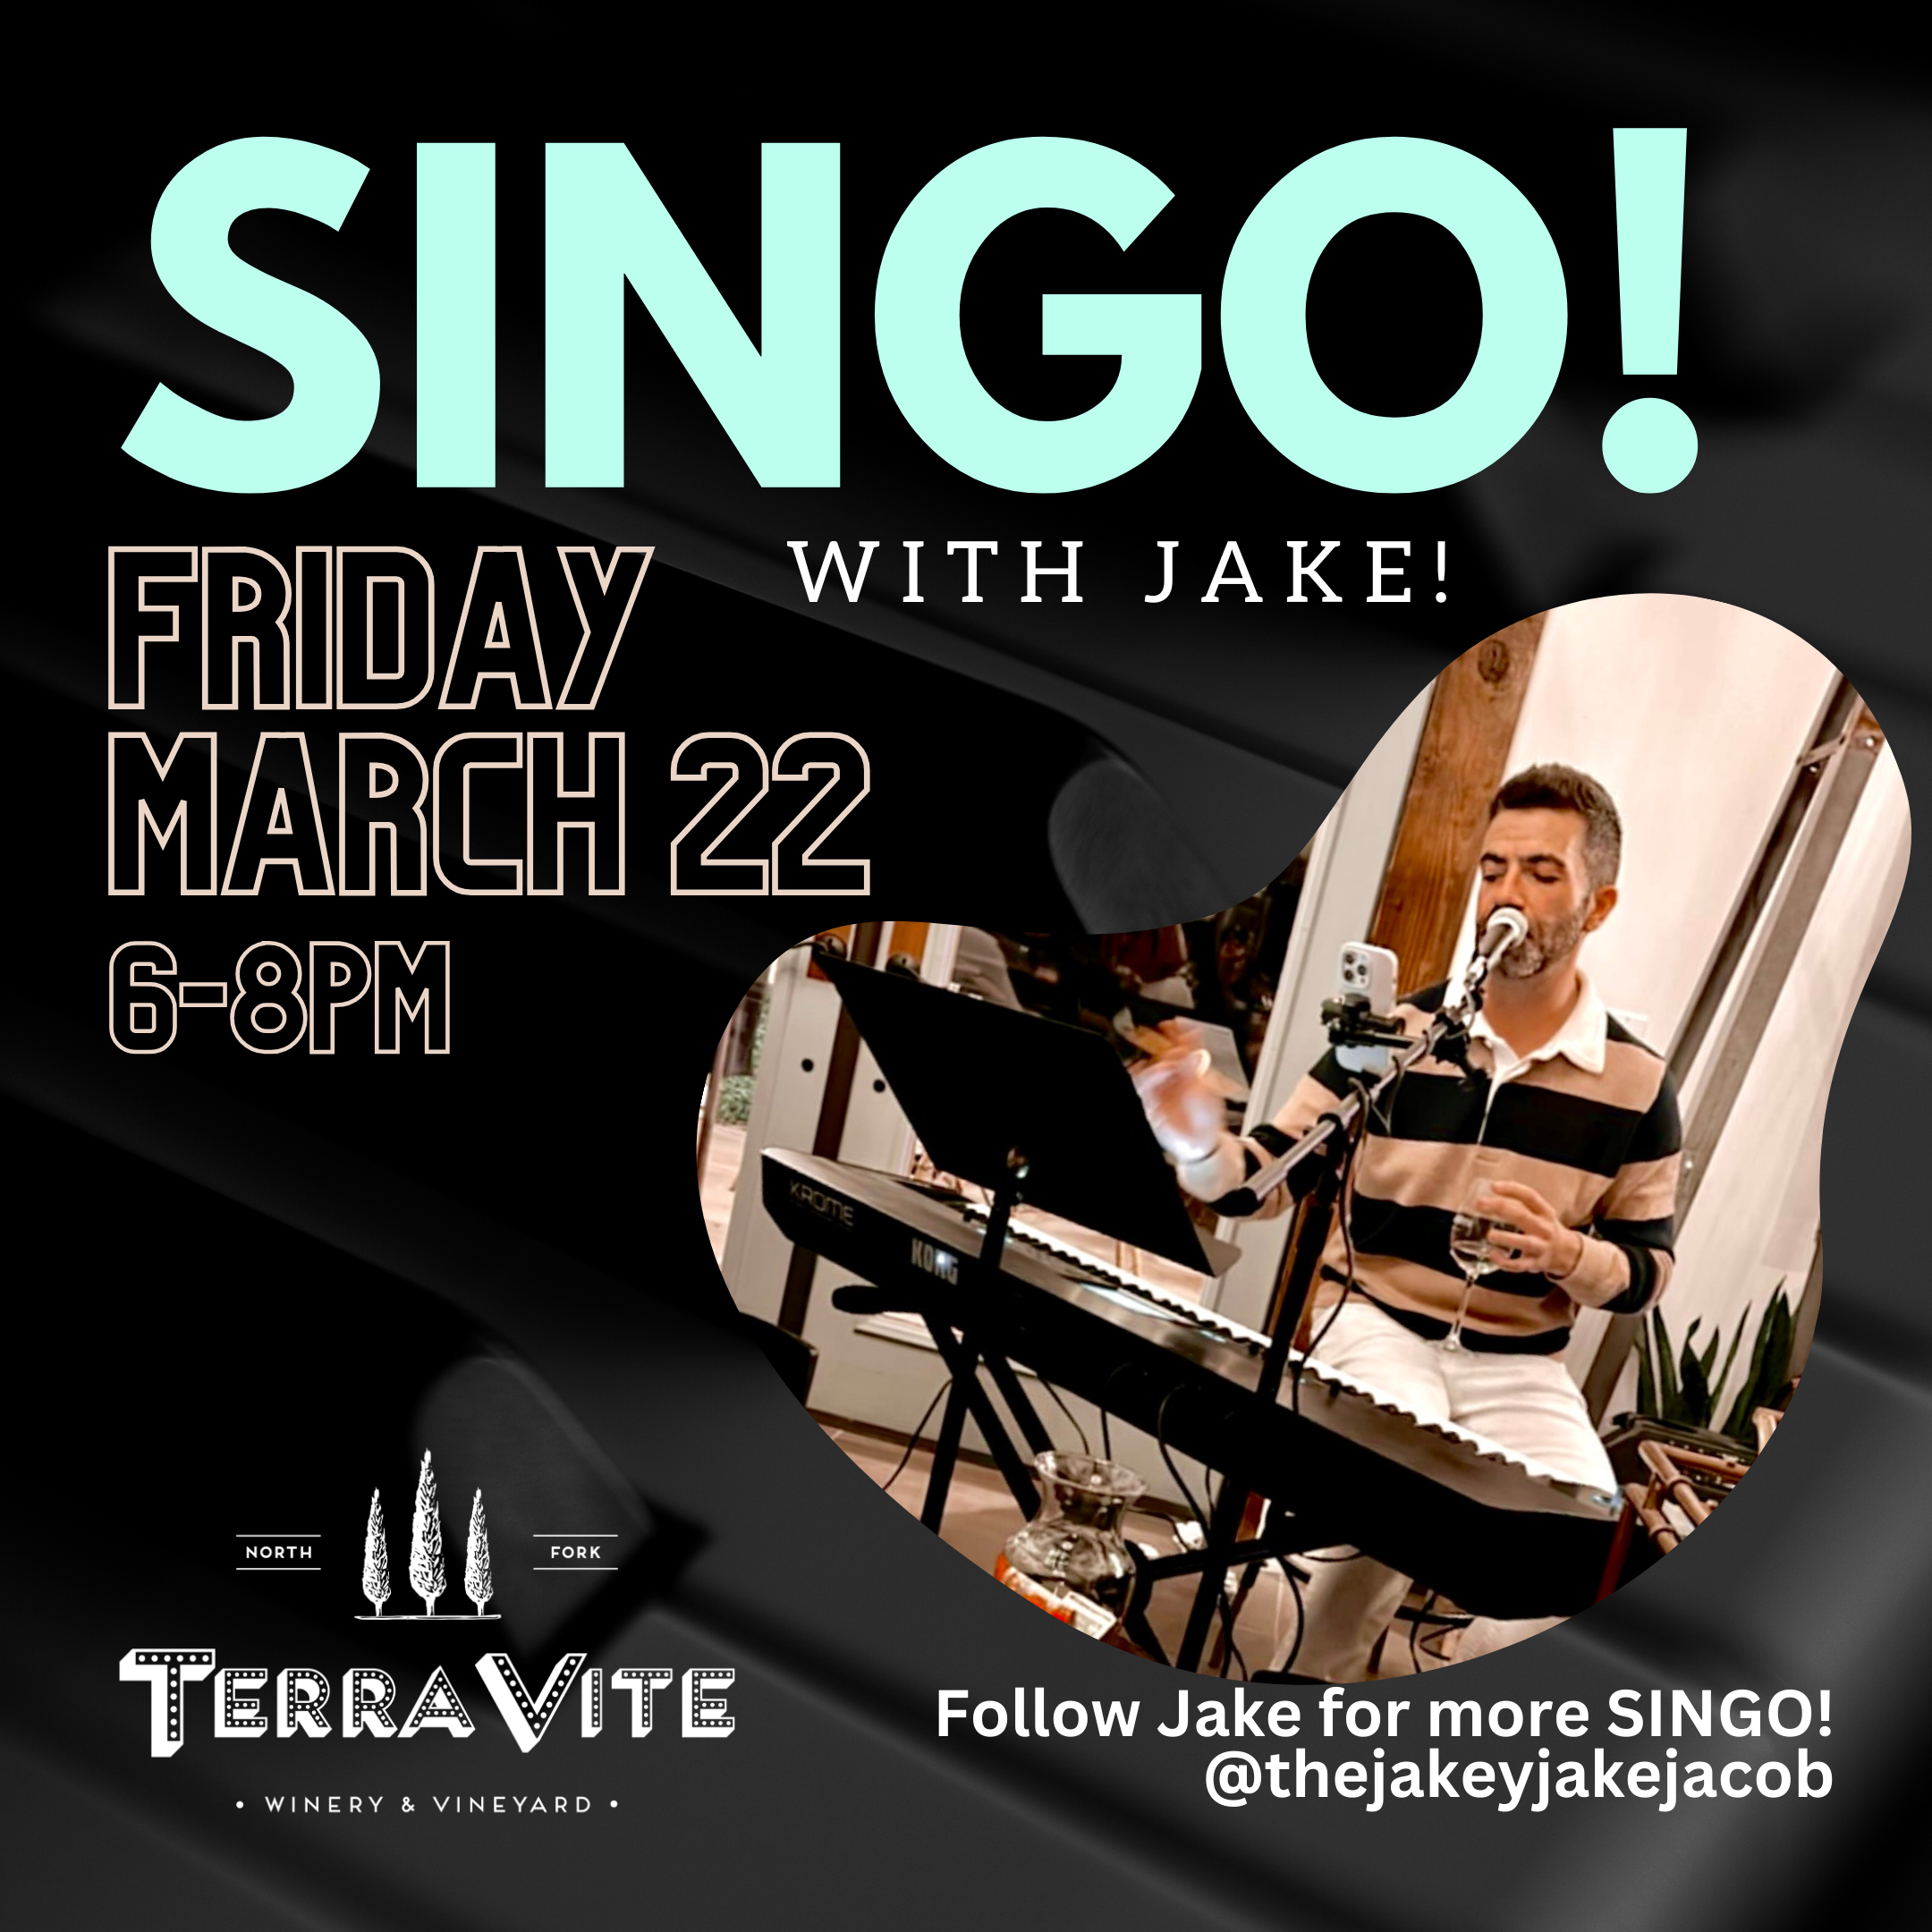 Singo! with Jake - Friday, March 22nd from 6-8pm!